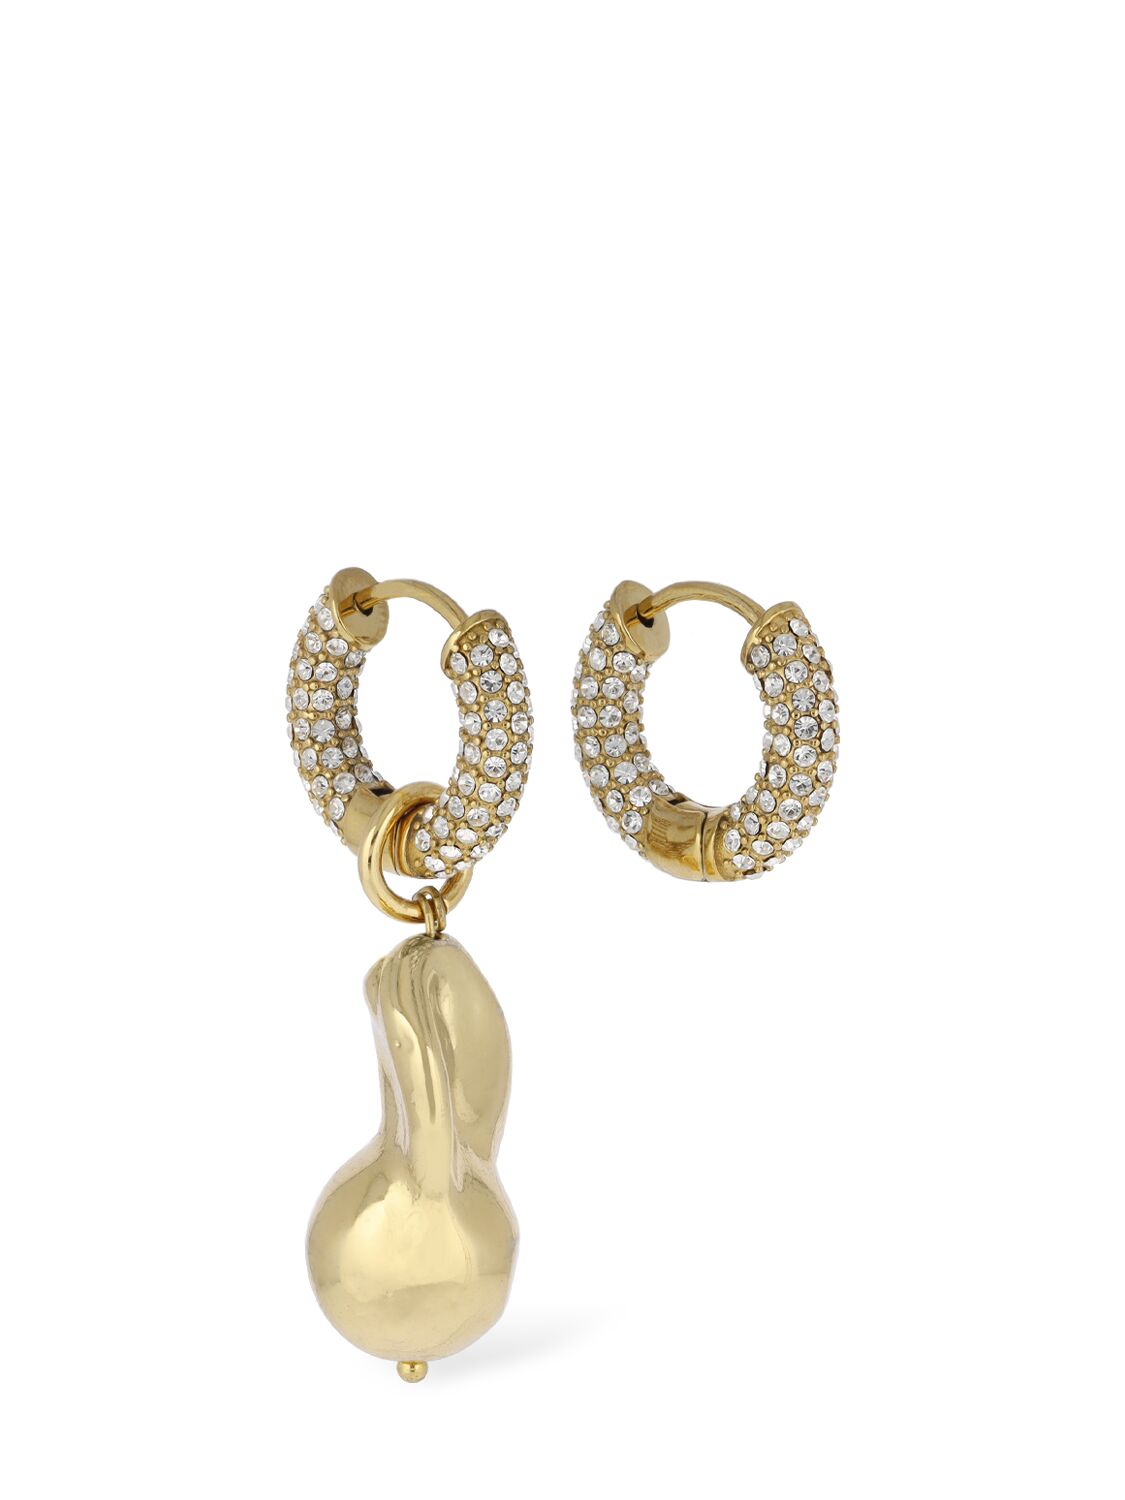 Image of Crystal Mismatched Earrings